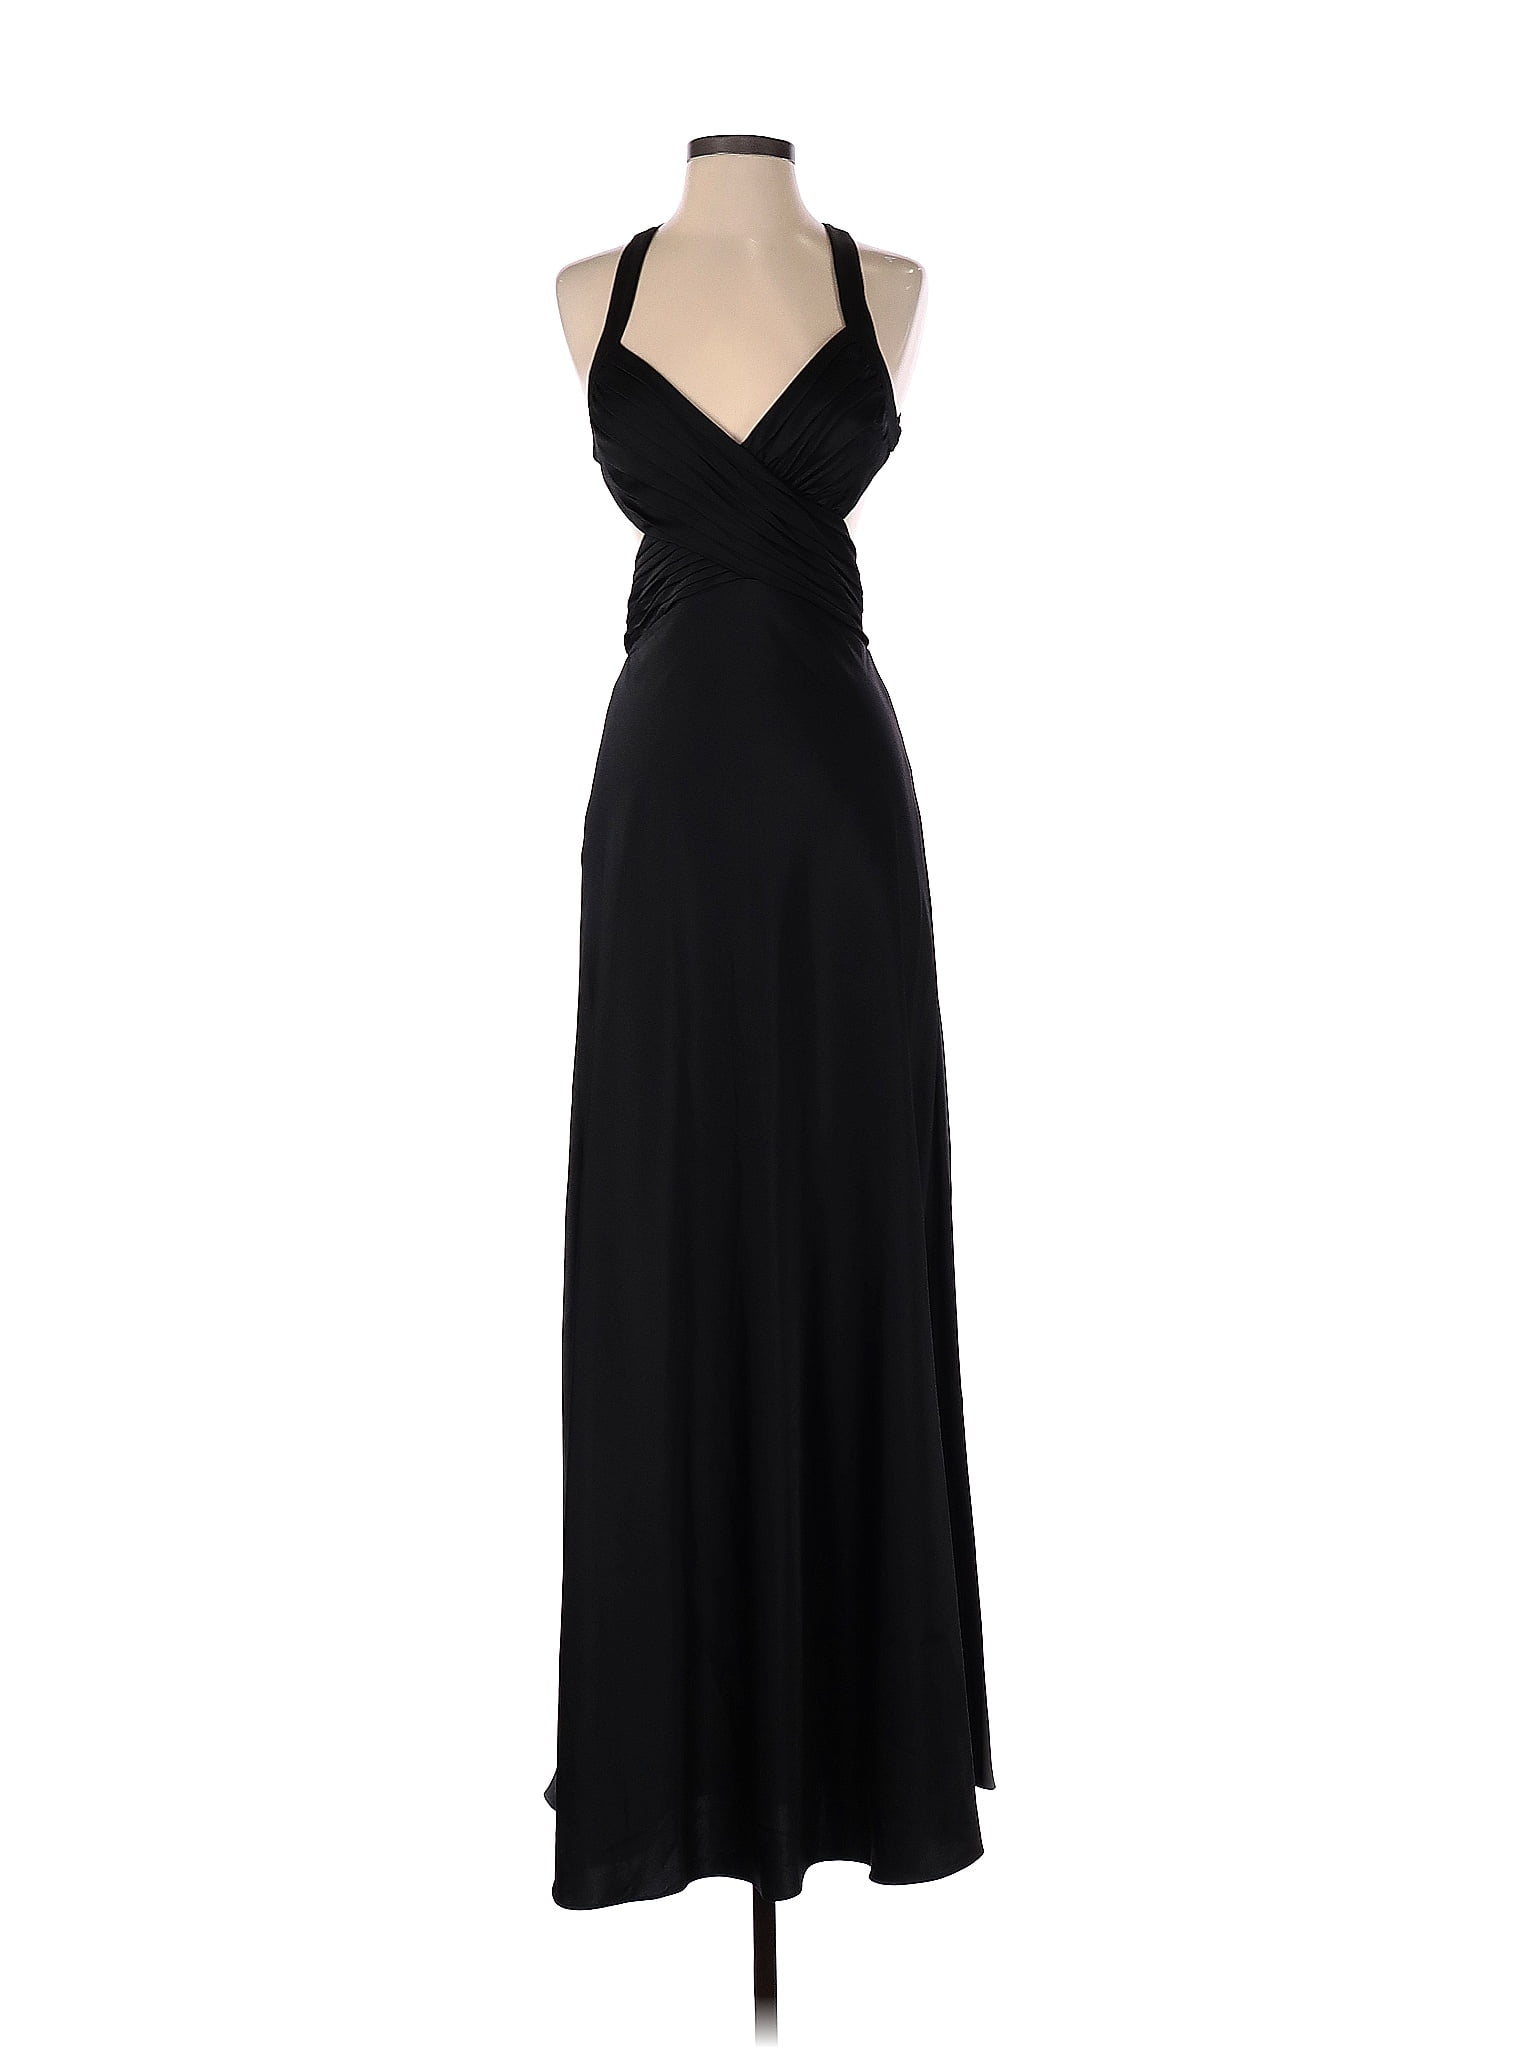 BCBGMAXAZRIA Women's Cocktail Dresses On Sale Up To 90% Off Retail ...